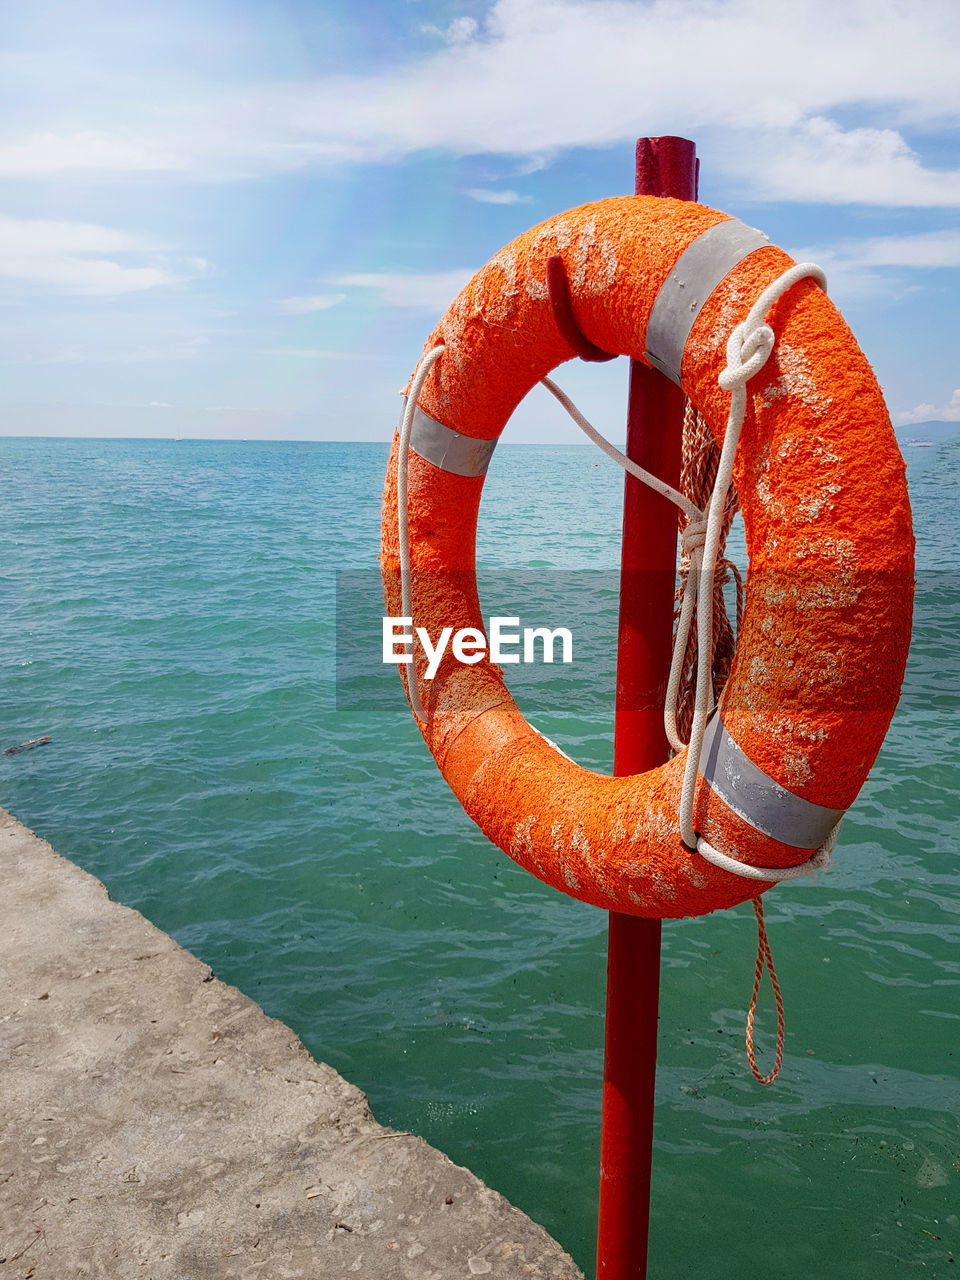 lifebuoy, water, life belt, sea, protection, security, sky, nature, rope, buoy, day, orange color, tubing, no people, horizon over water, circle, tranquility, scenics - nature, horizon, geometric shape, beach, cloud, red, rescue, tube, outdoors, beauty in nature, land, vacation, shape, nautical vessel, tranquil scene, sunlight, hanging, transportation, metal